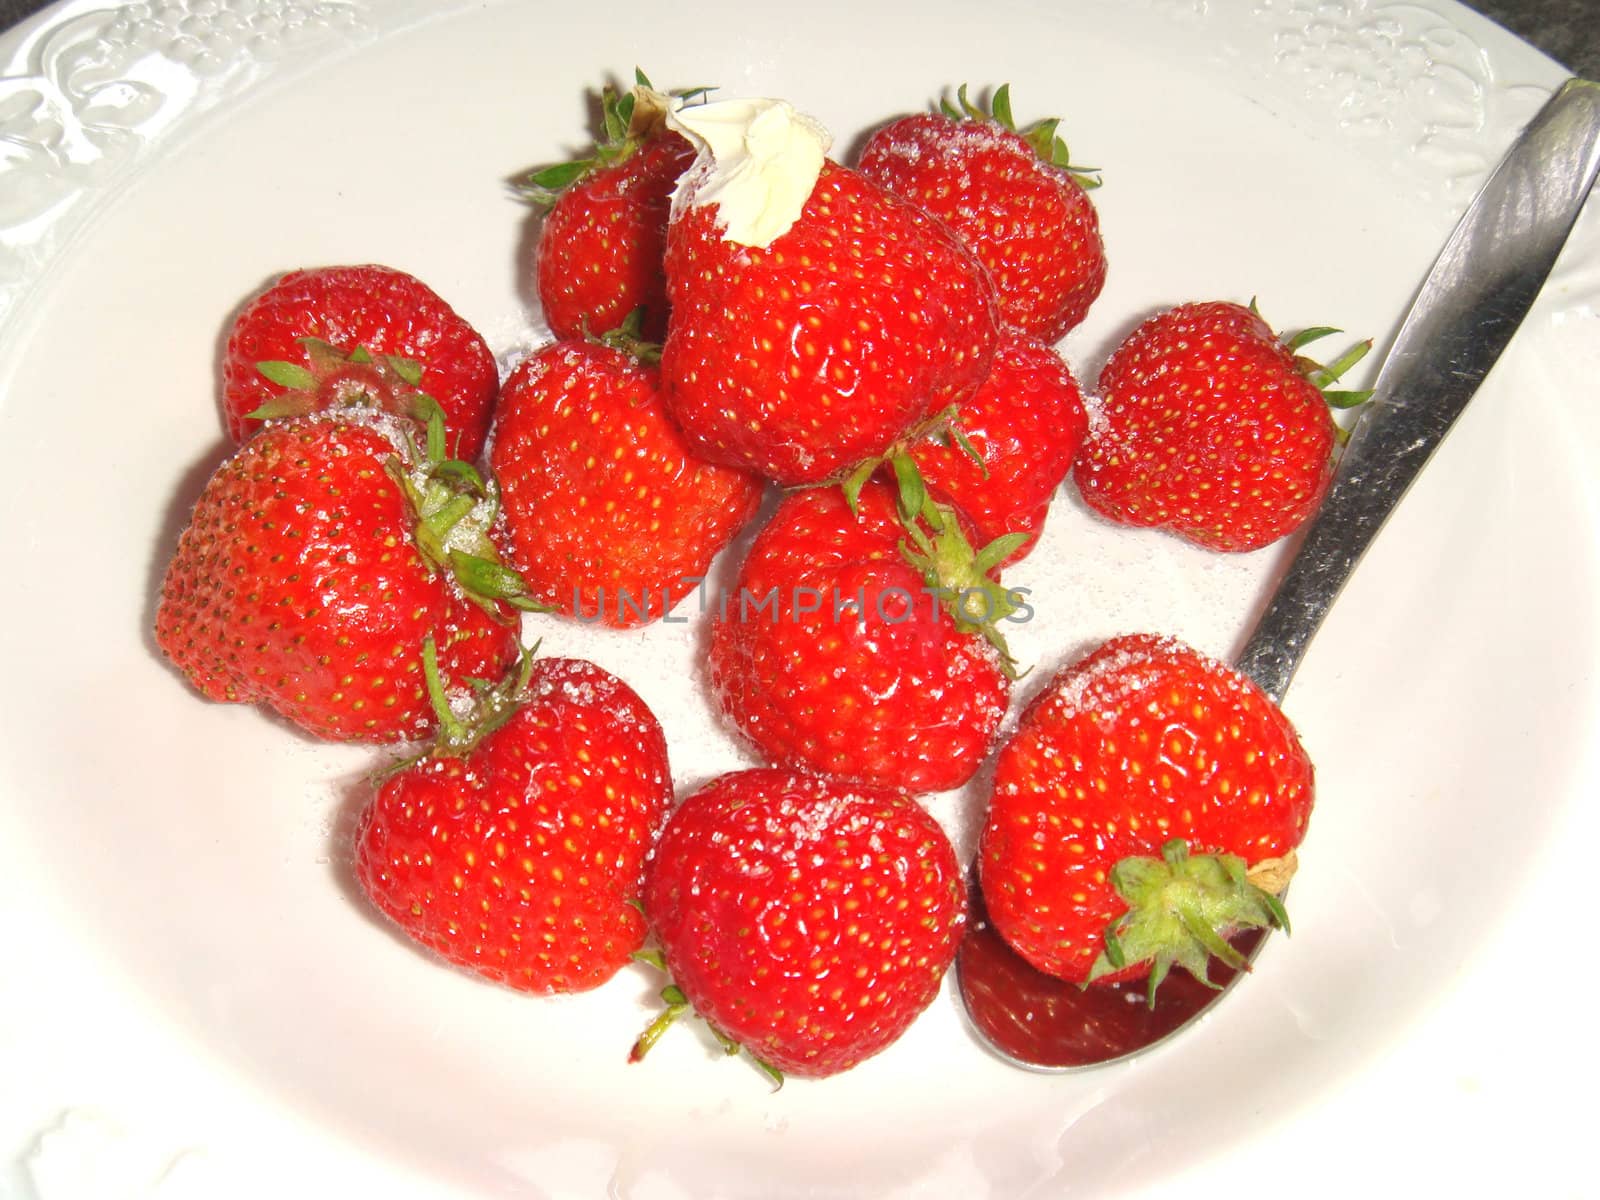 Strawberries with sugar and a drop of clotted cream.